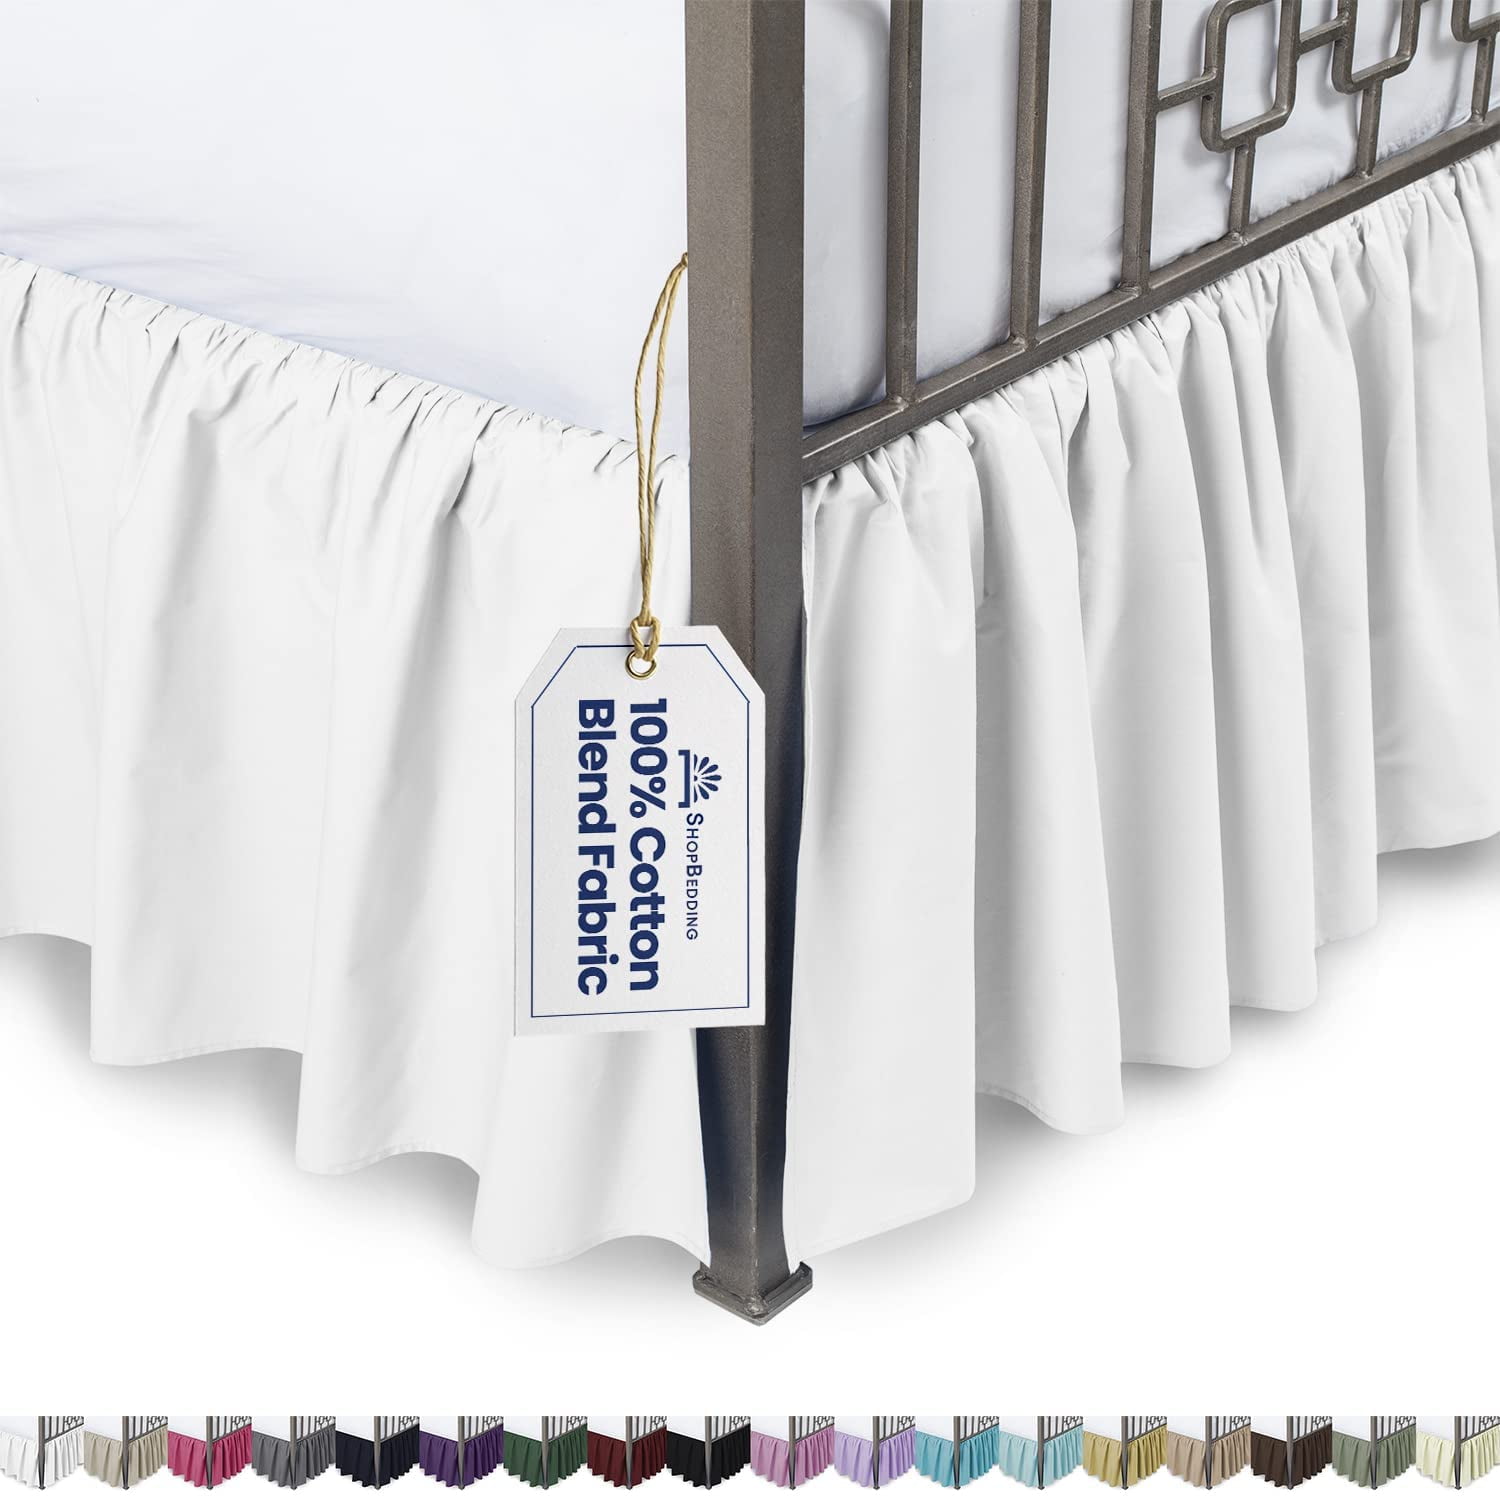 NEW SPLIT CORNER RUFFLE BED SKIRT ALL SIZE/DROP LENGTH SOLID WHITE 600 TC COTTON 